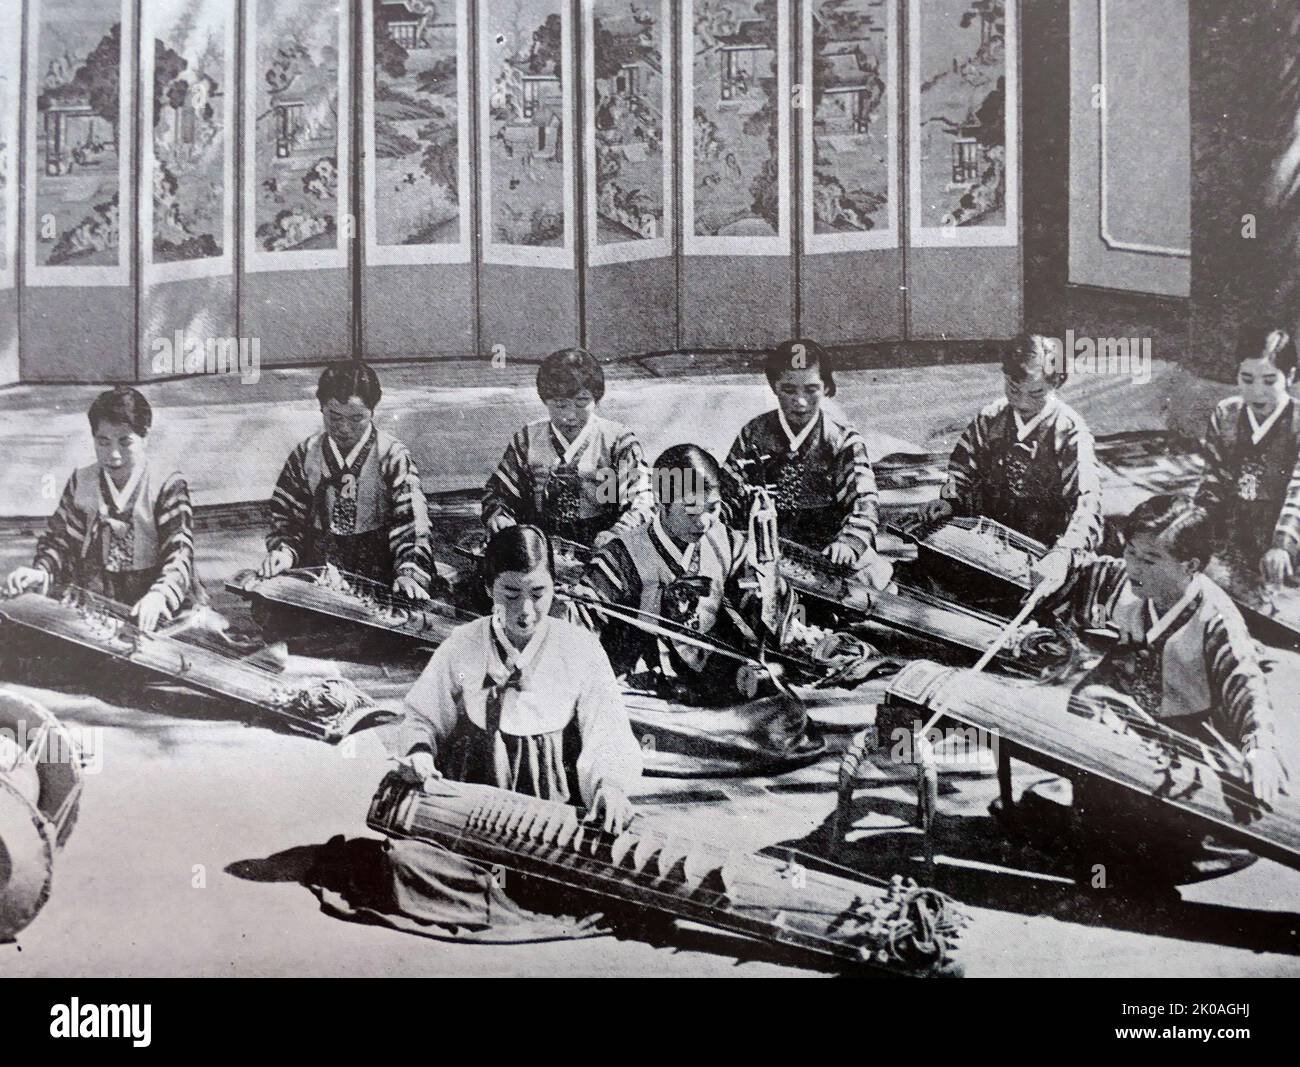 The musicians shown here are all college students. The instruments in the back row are all Gayageum : a plucked zither with 12 strings, though some more recent variants have 18, 21 or 25 strings. It is probably the best known traditional Korean musical instrument. The front row, from left to right, we see a Janggu (drum), Geomungo (plucked zither with both bridges and frets, made in Goguryeo before the 5th century AD) and an A-jaeng (string, plays the bass part in ensemble music). In the middle, she is playing a Haegeum (string). Stock Photo